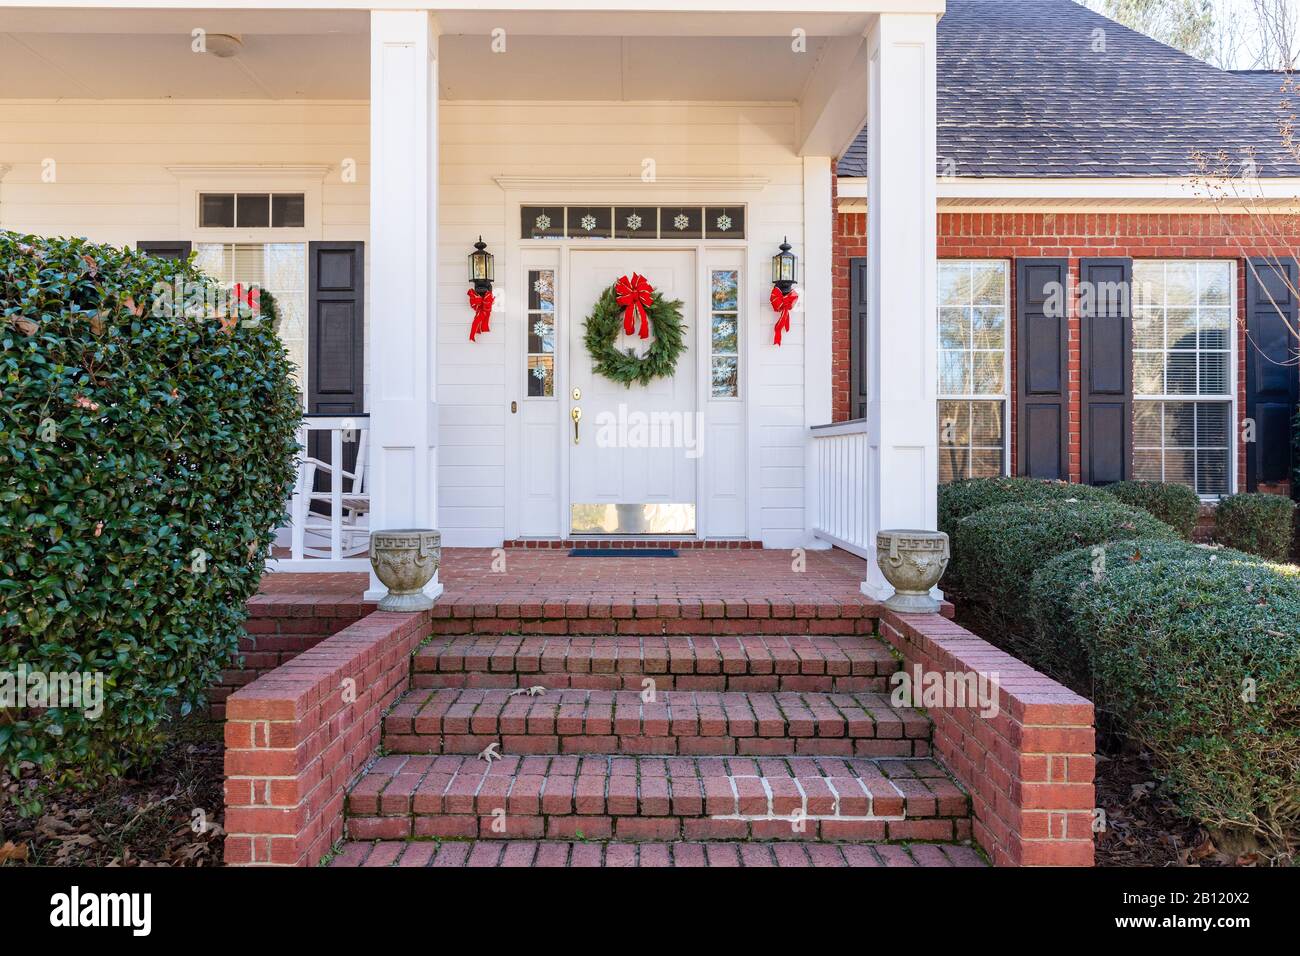 Residential home front door decorated for Christmas Stock Photo